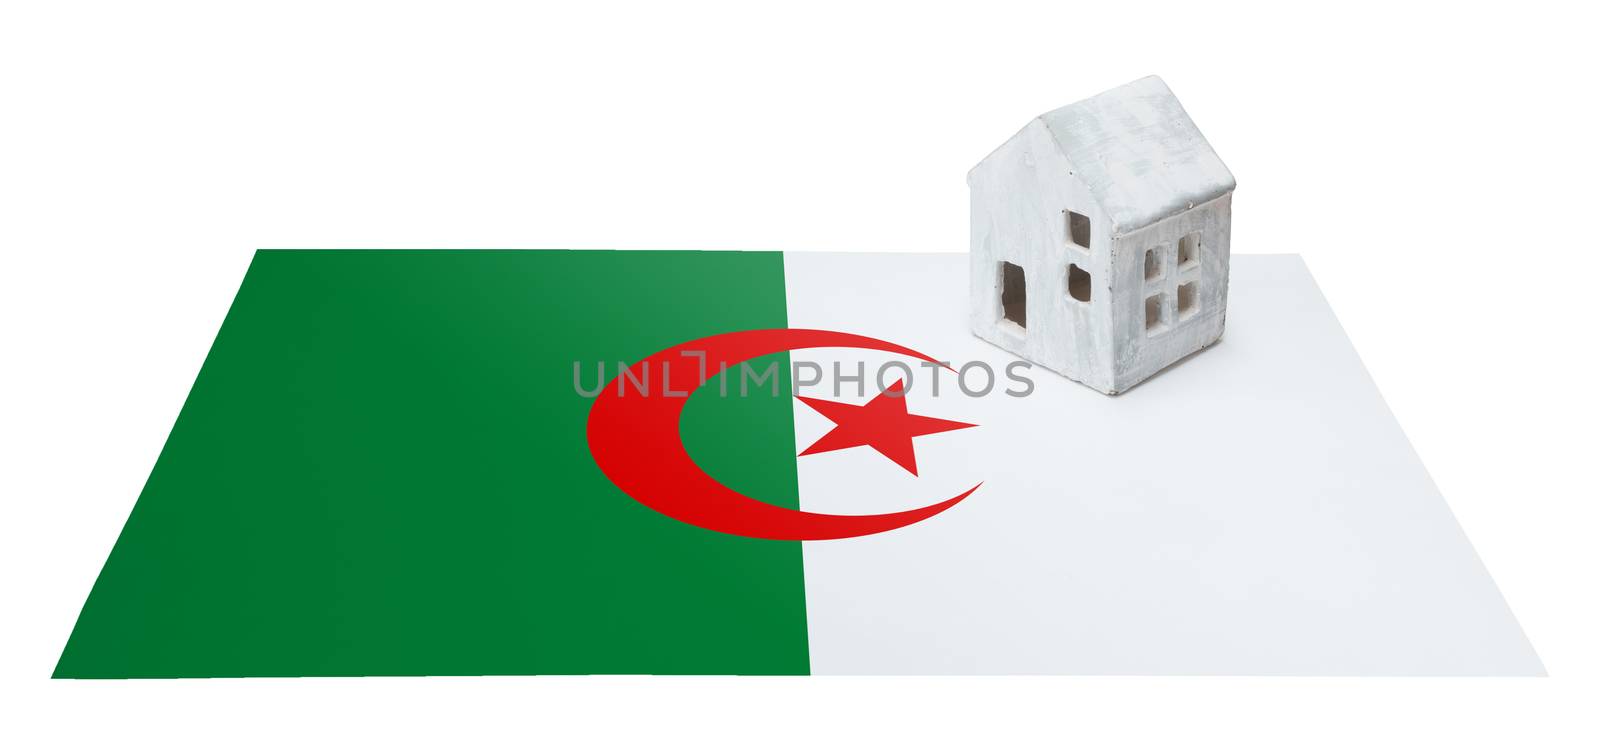 Small house on a flag - Living or migrating to Algeria